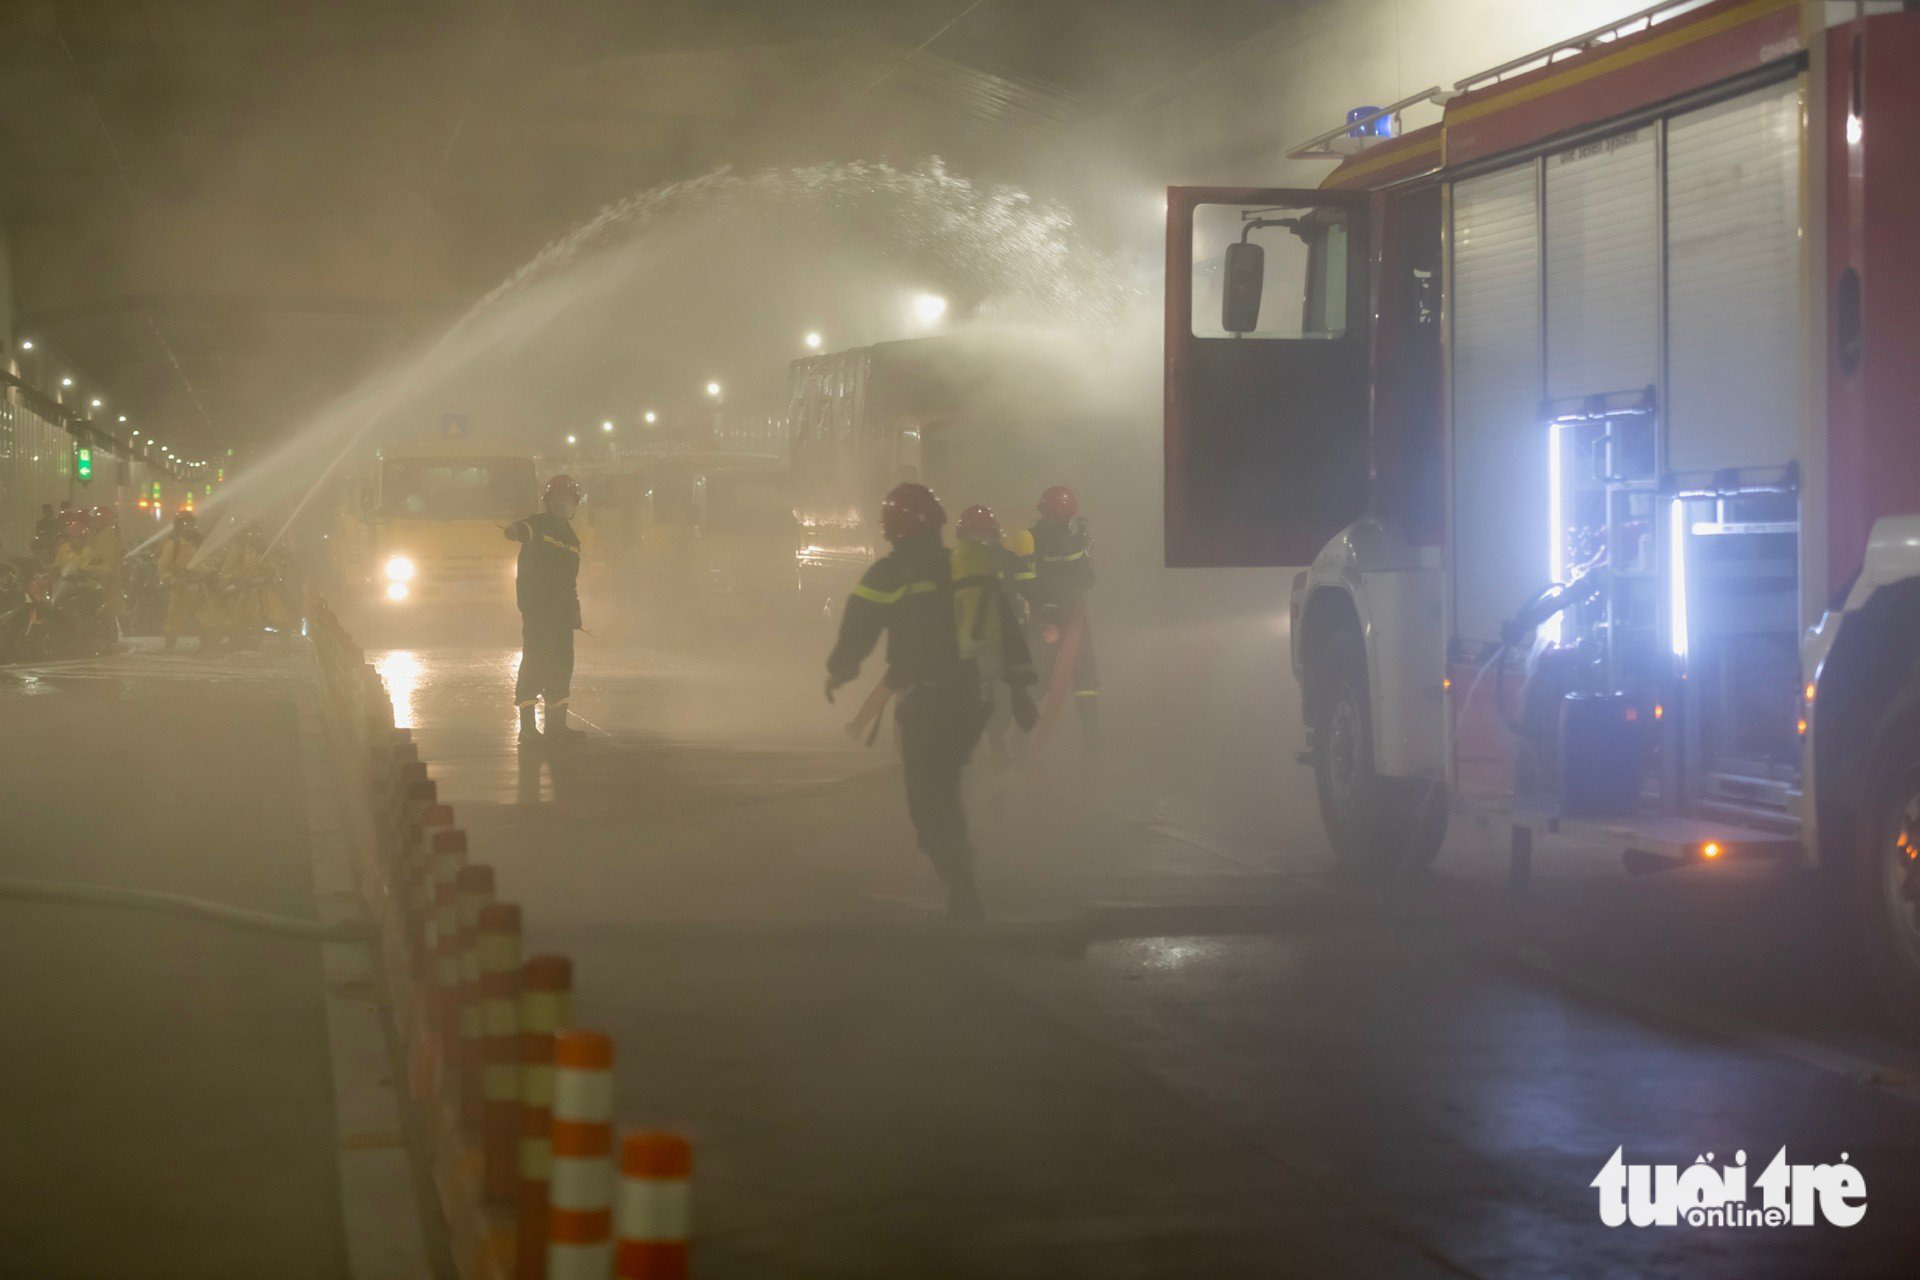 Firefighters spray water to extinguish the fire inside the Saigon River Tunnel. Photo: Minh Hoa / Tuoi Tre